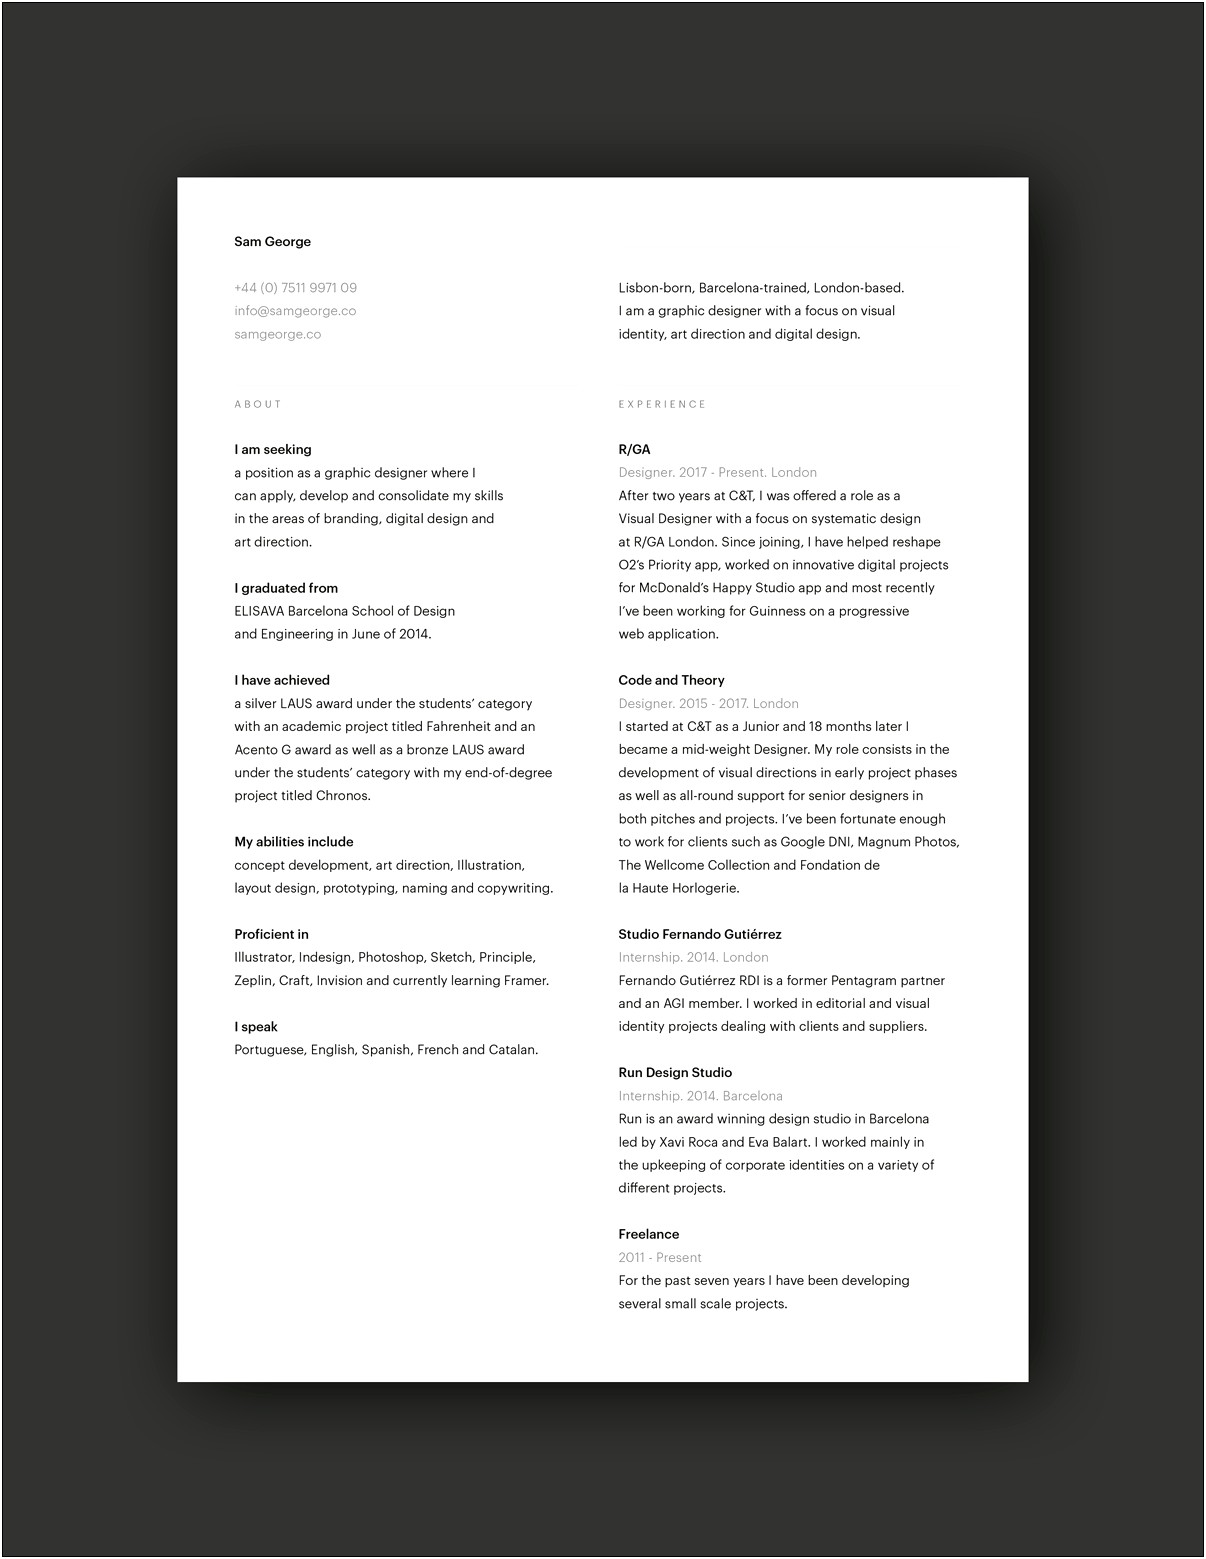 A Well Written Resumes Shows Off Your Skills